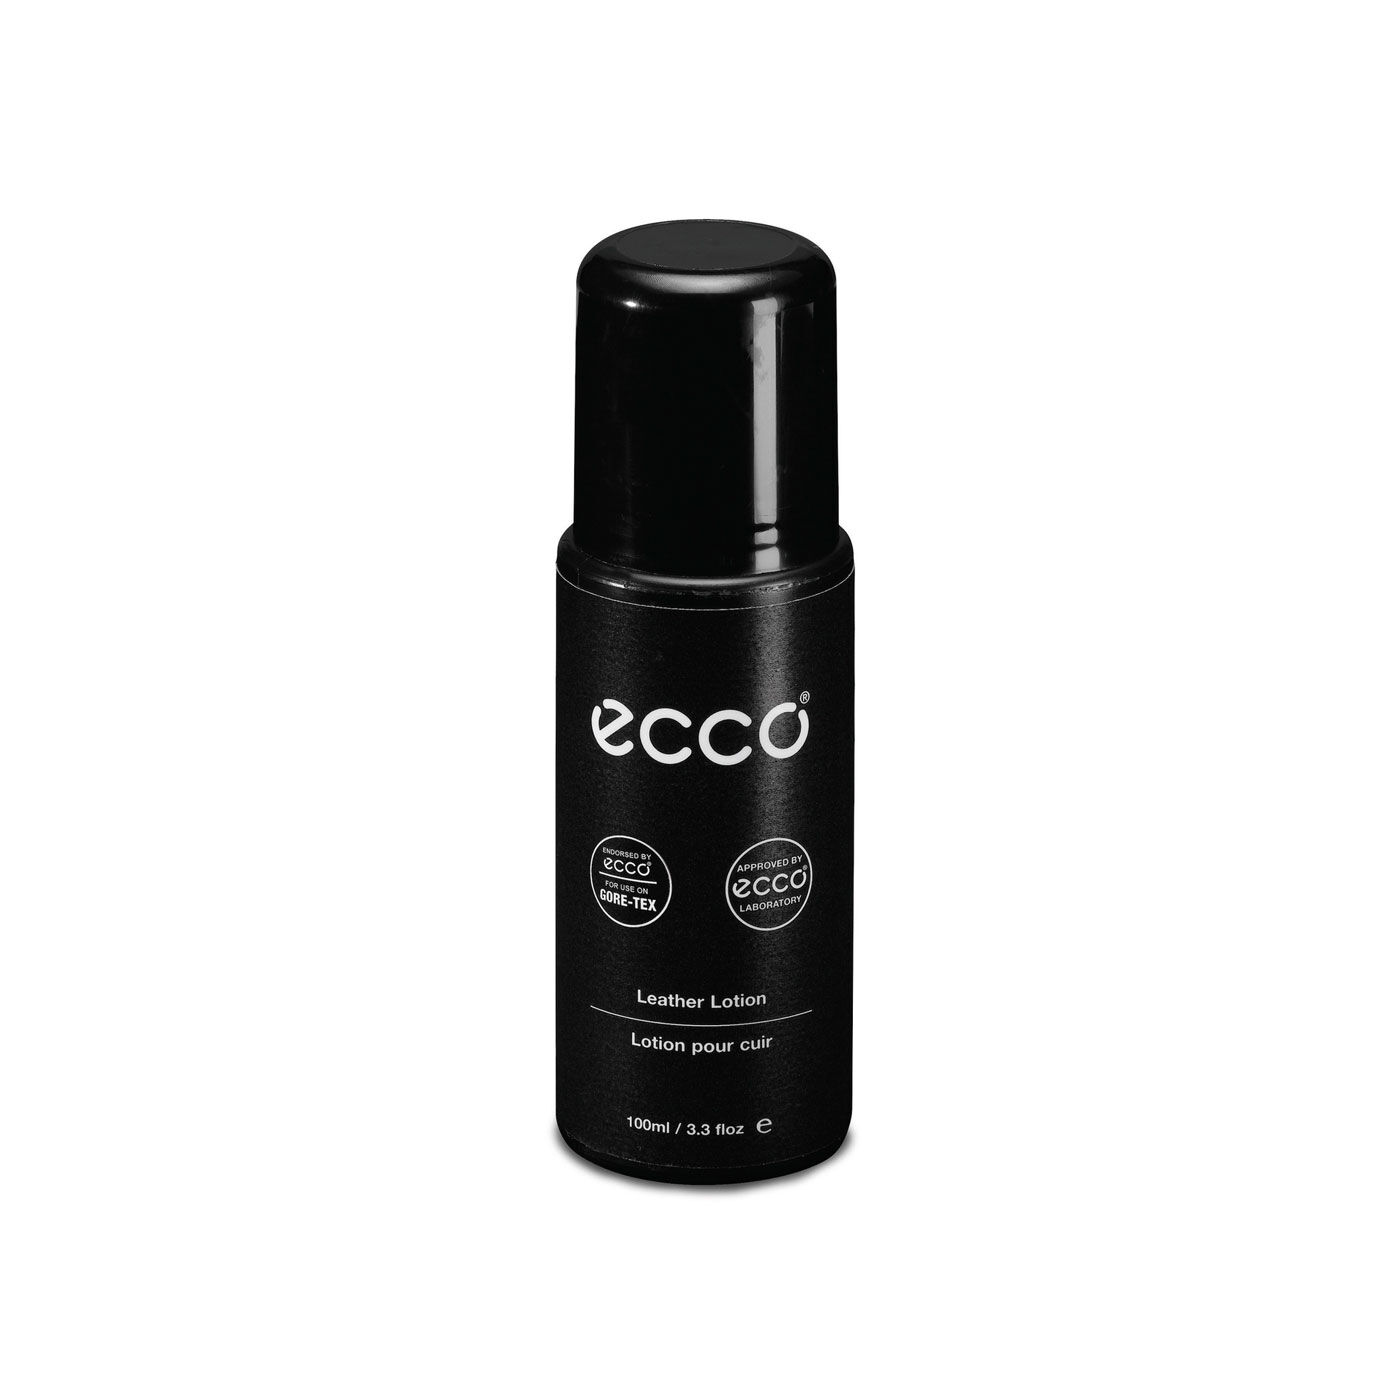 ecco leather cleaner